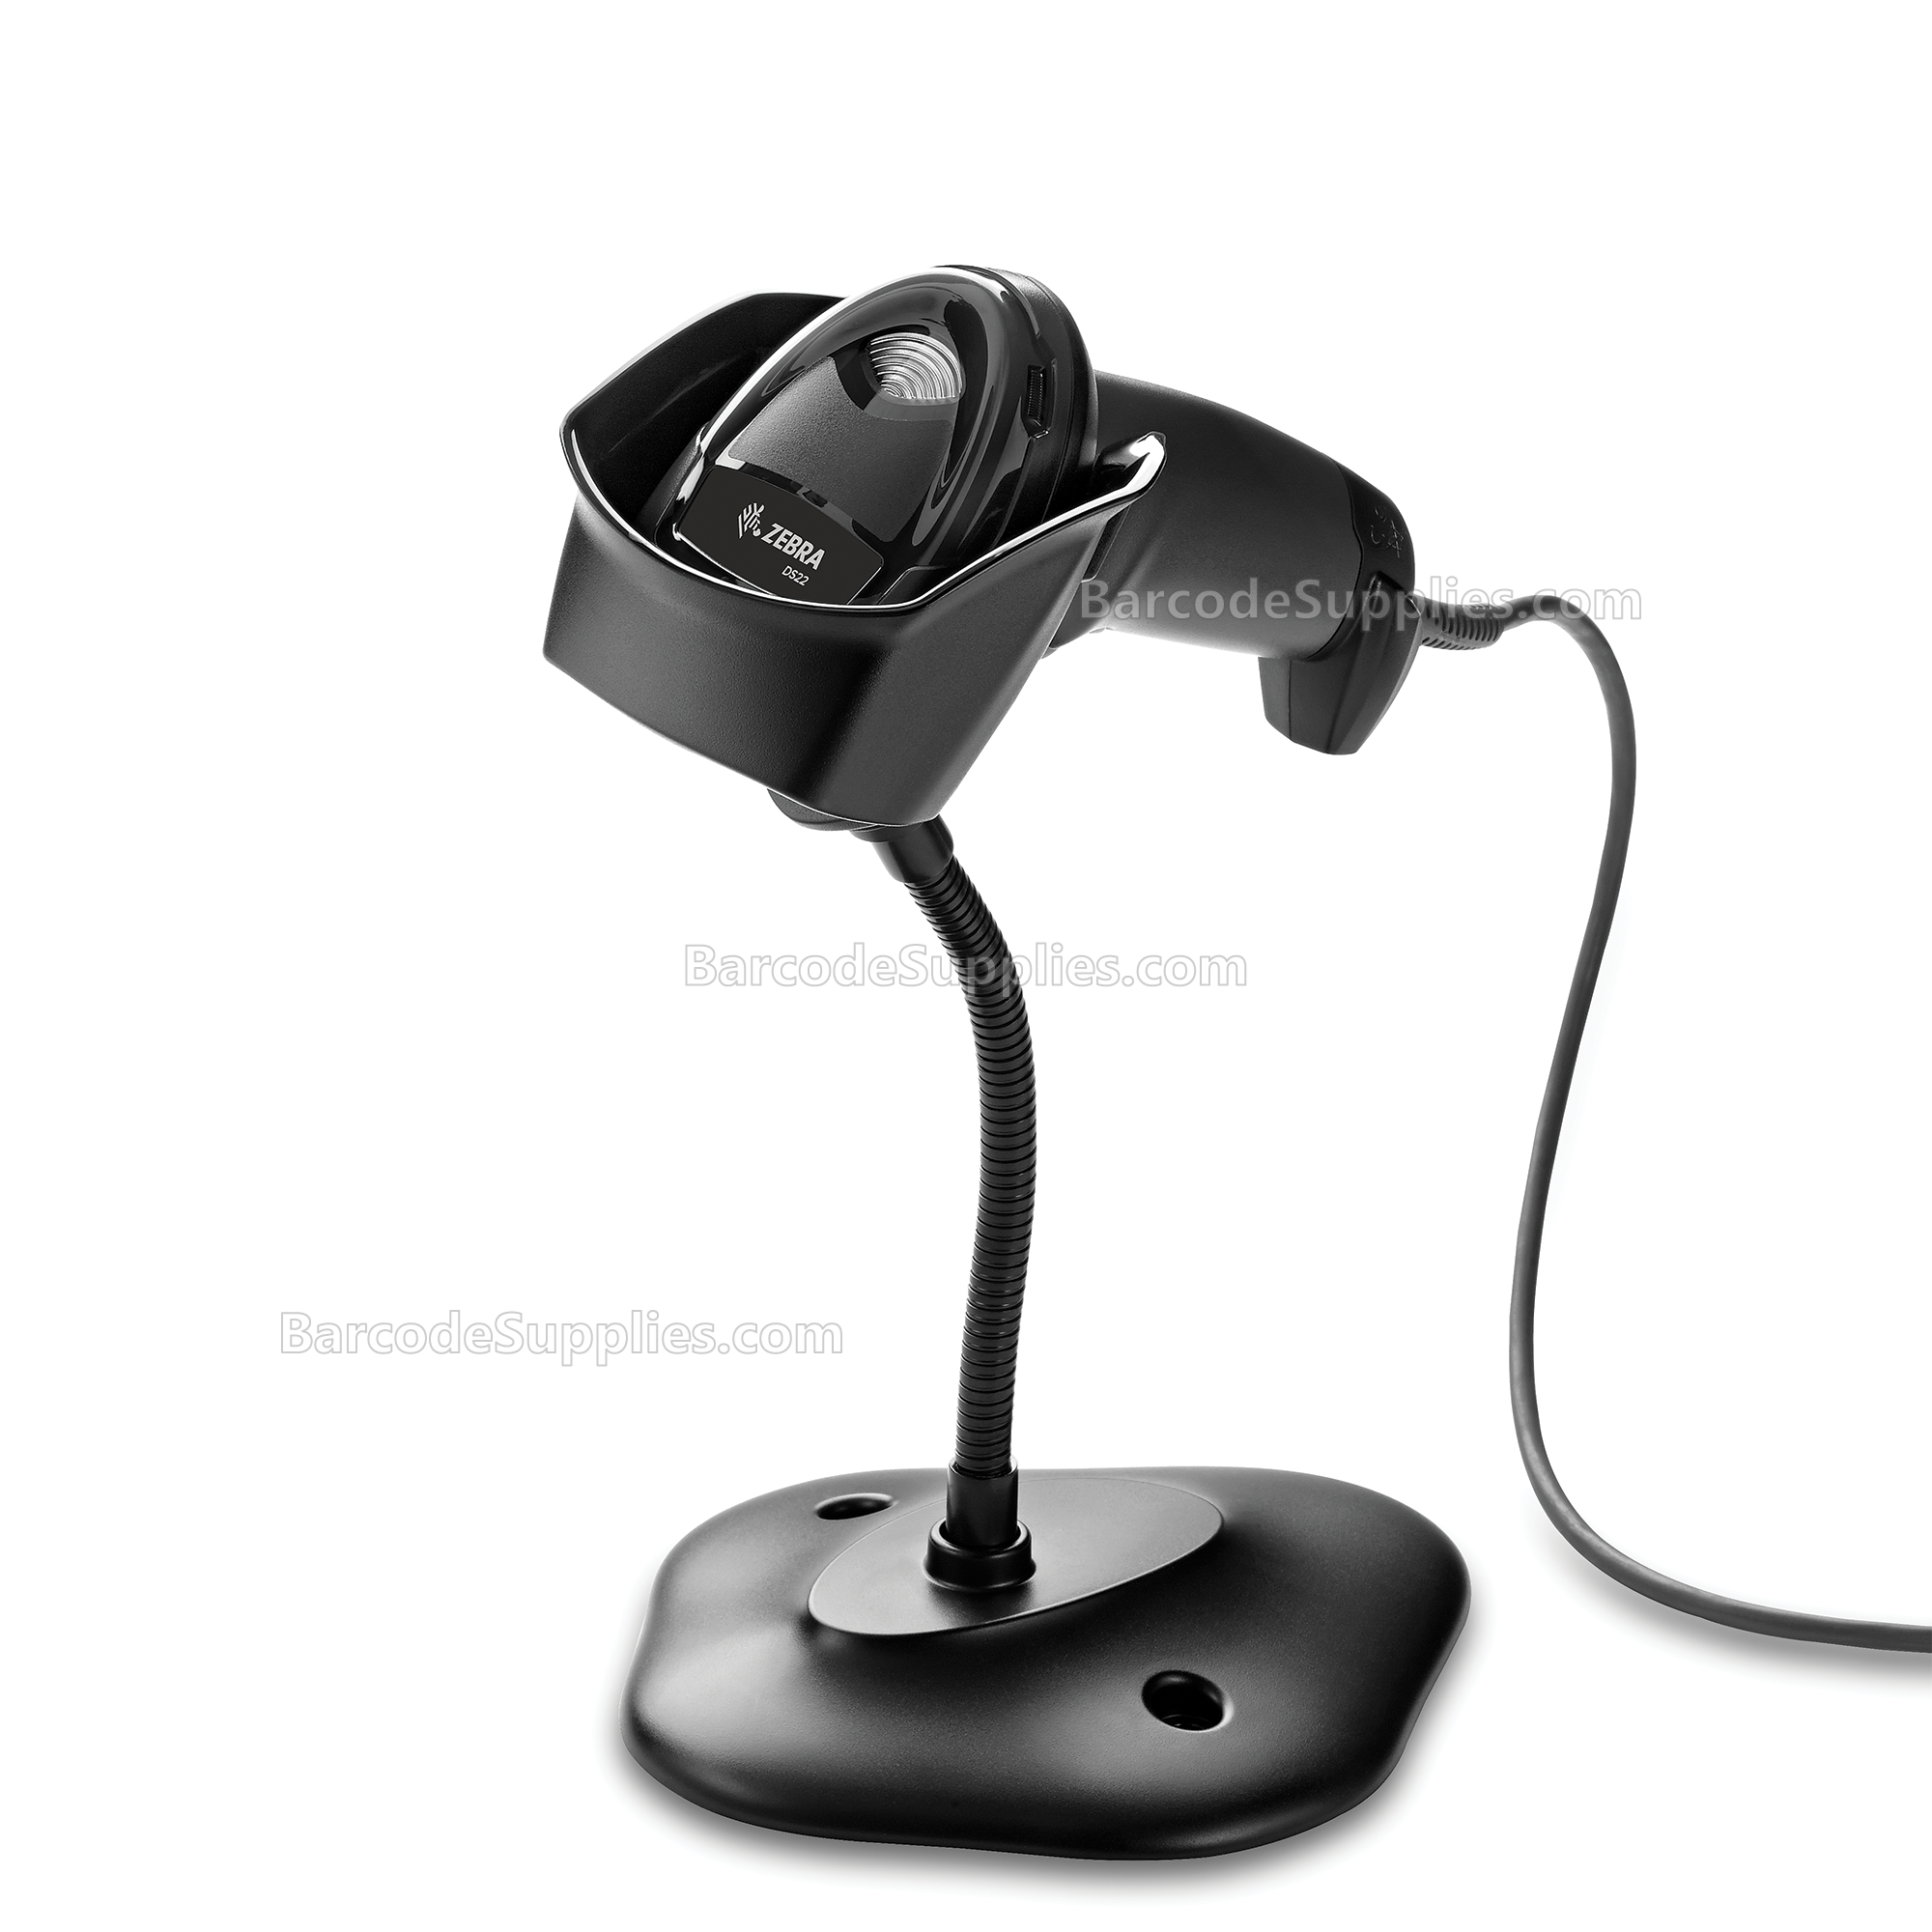 DS2208-SR BLACK WITH STAND COILED USB KIT: DS2208-SR00007ZZWW SCANNER, CBA-U32-C09ZAR SHIELDED COILED USB 9' CABLE, 20-71043-04R STAND - MPN: DS2208-SR7U3200SGW